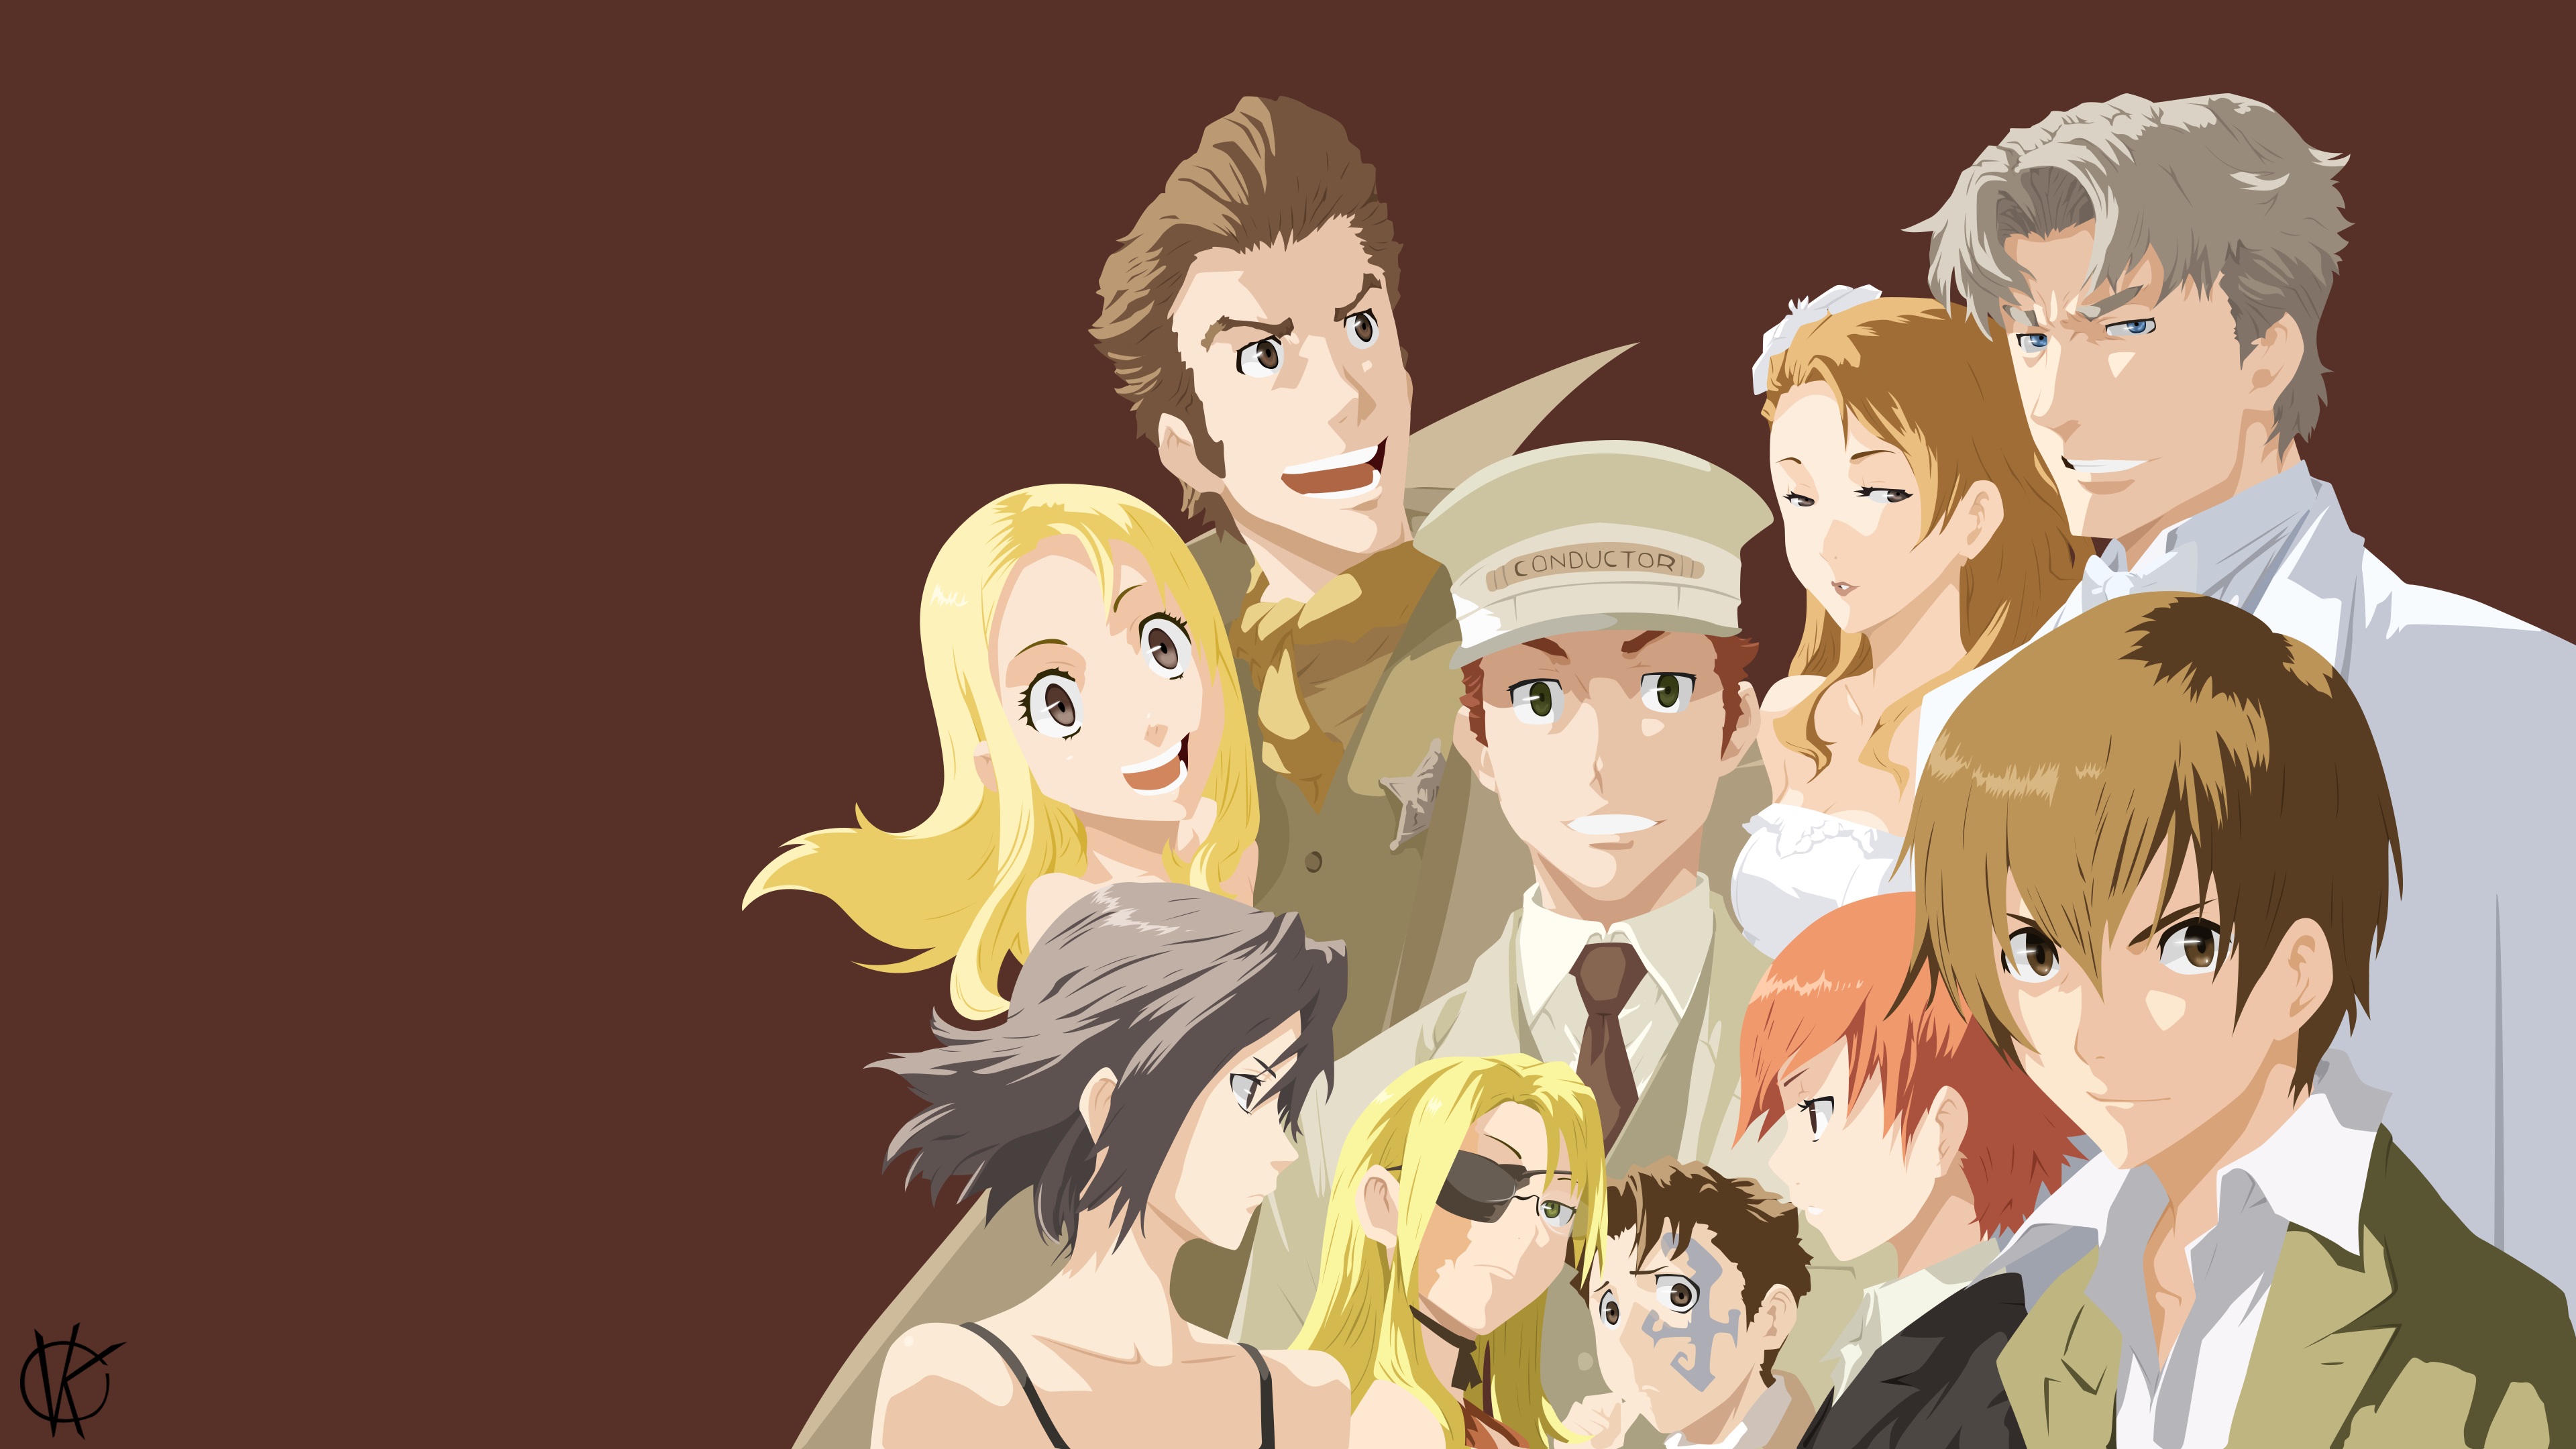 Anime Baccano! HD Wallpaper | Background Image